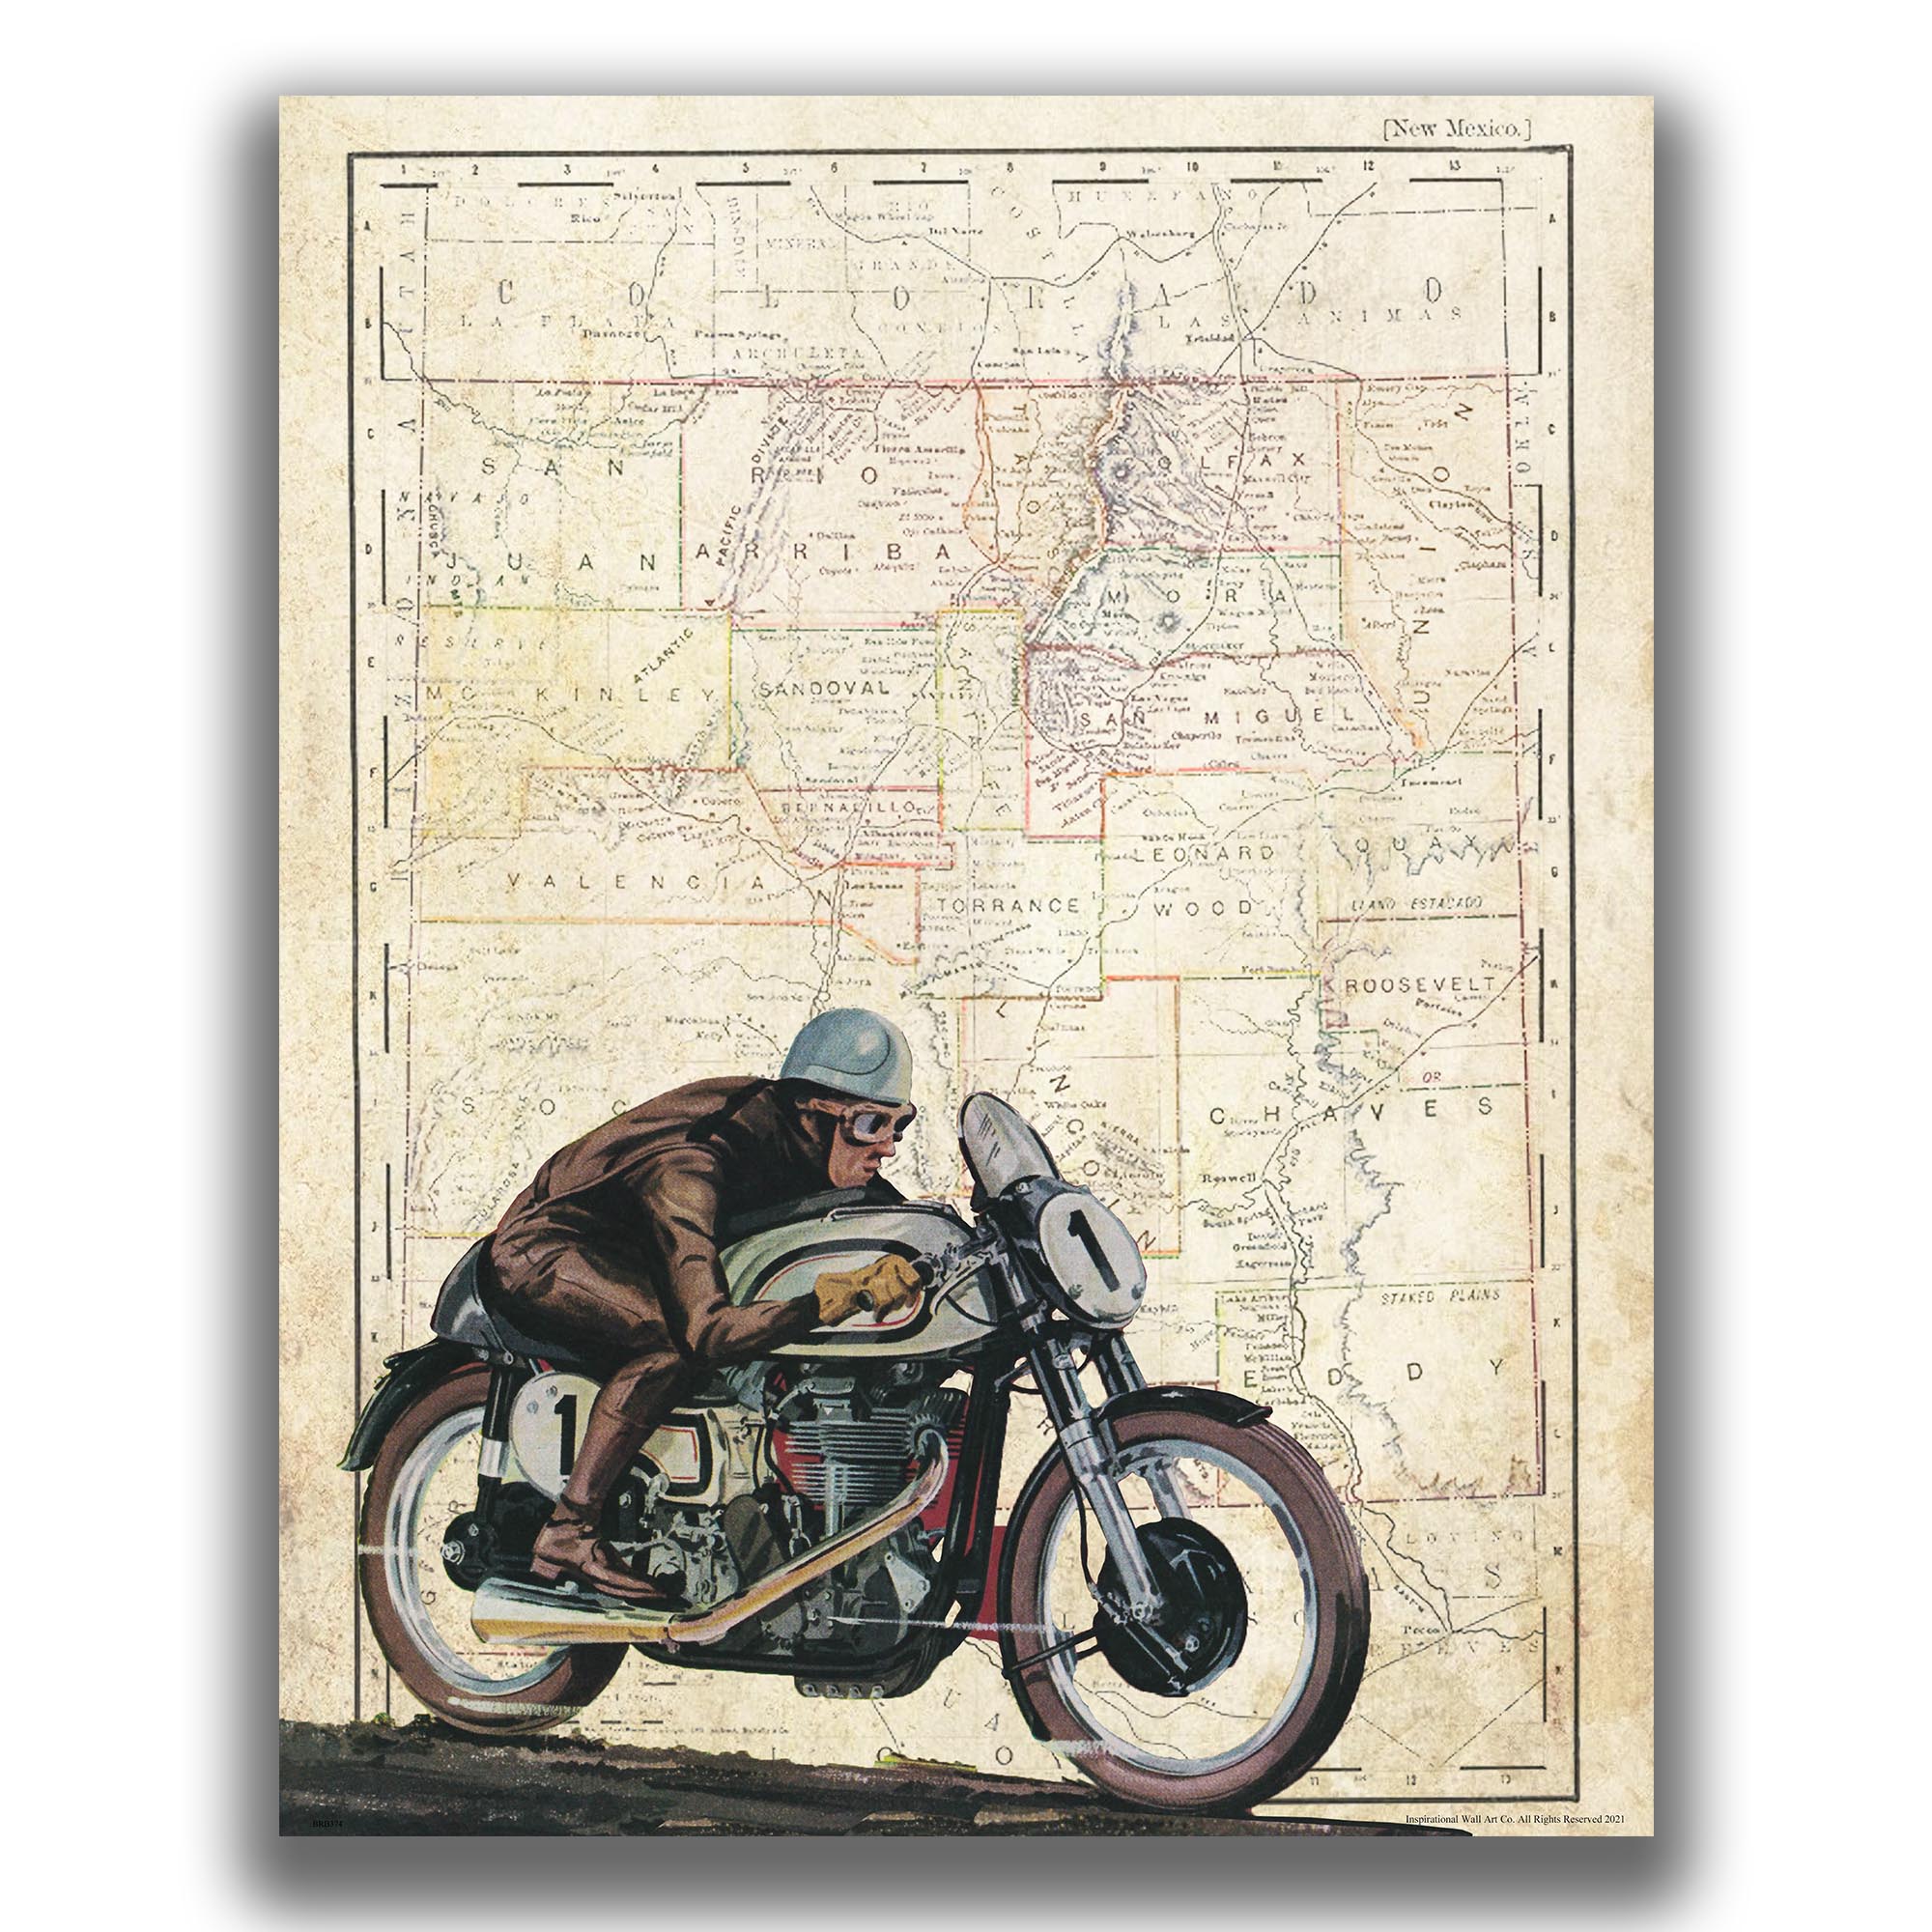 New Mexico - Motorcycle Poster